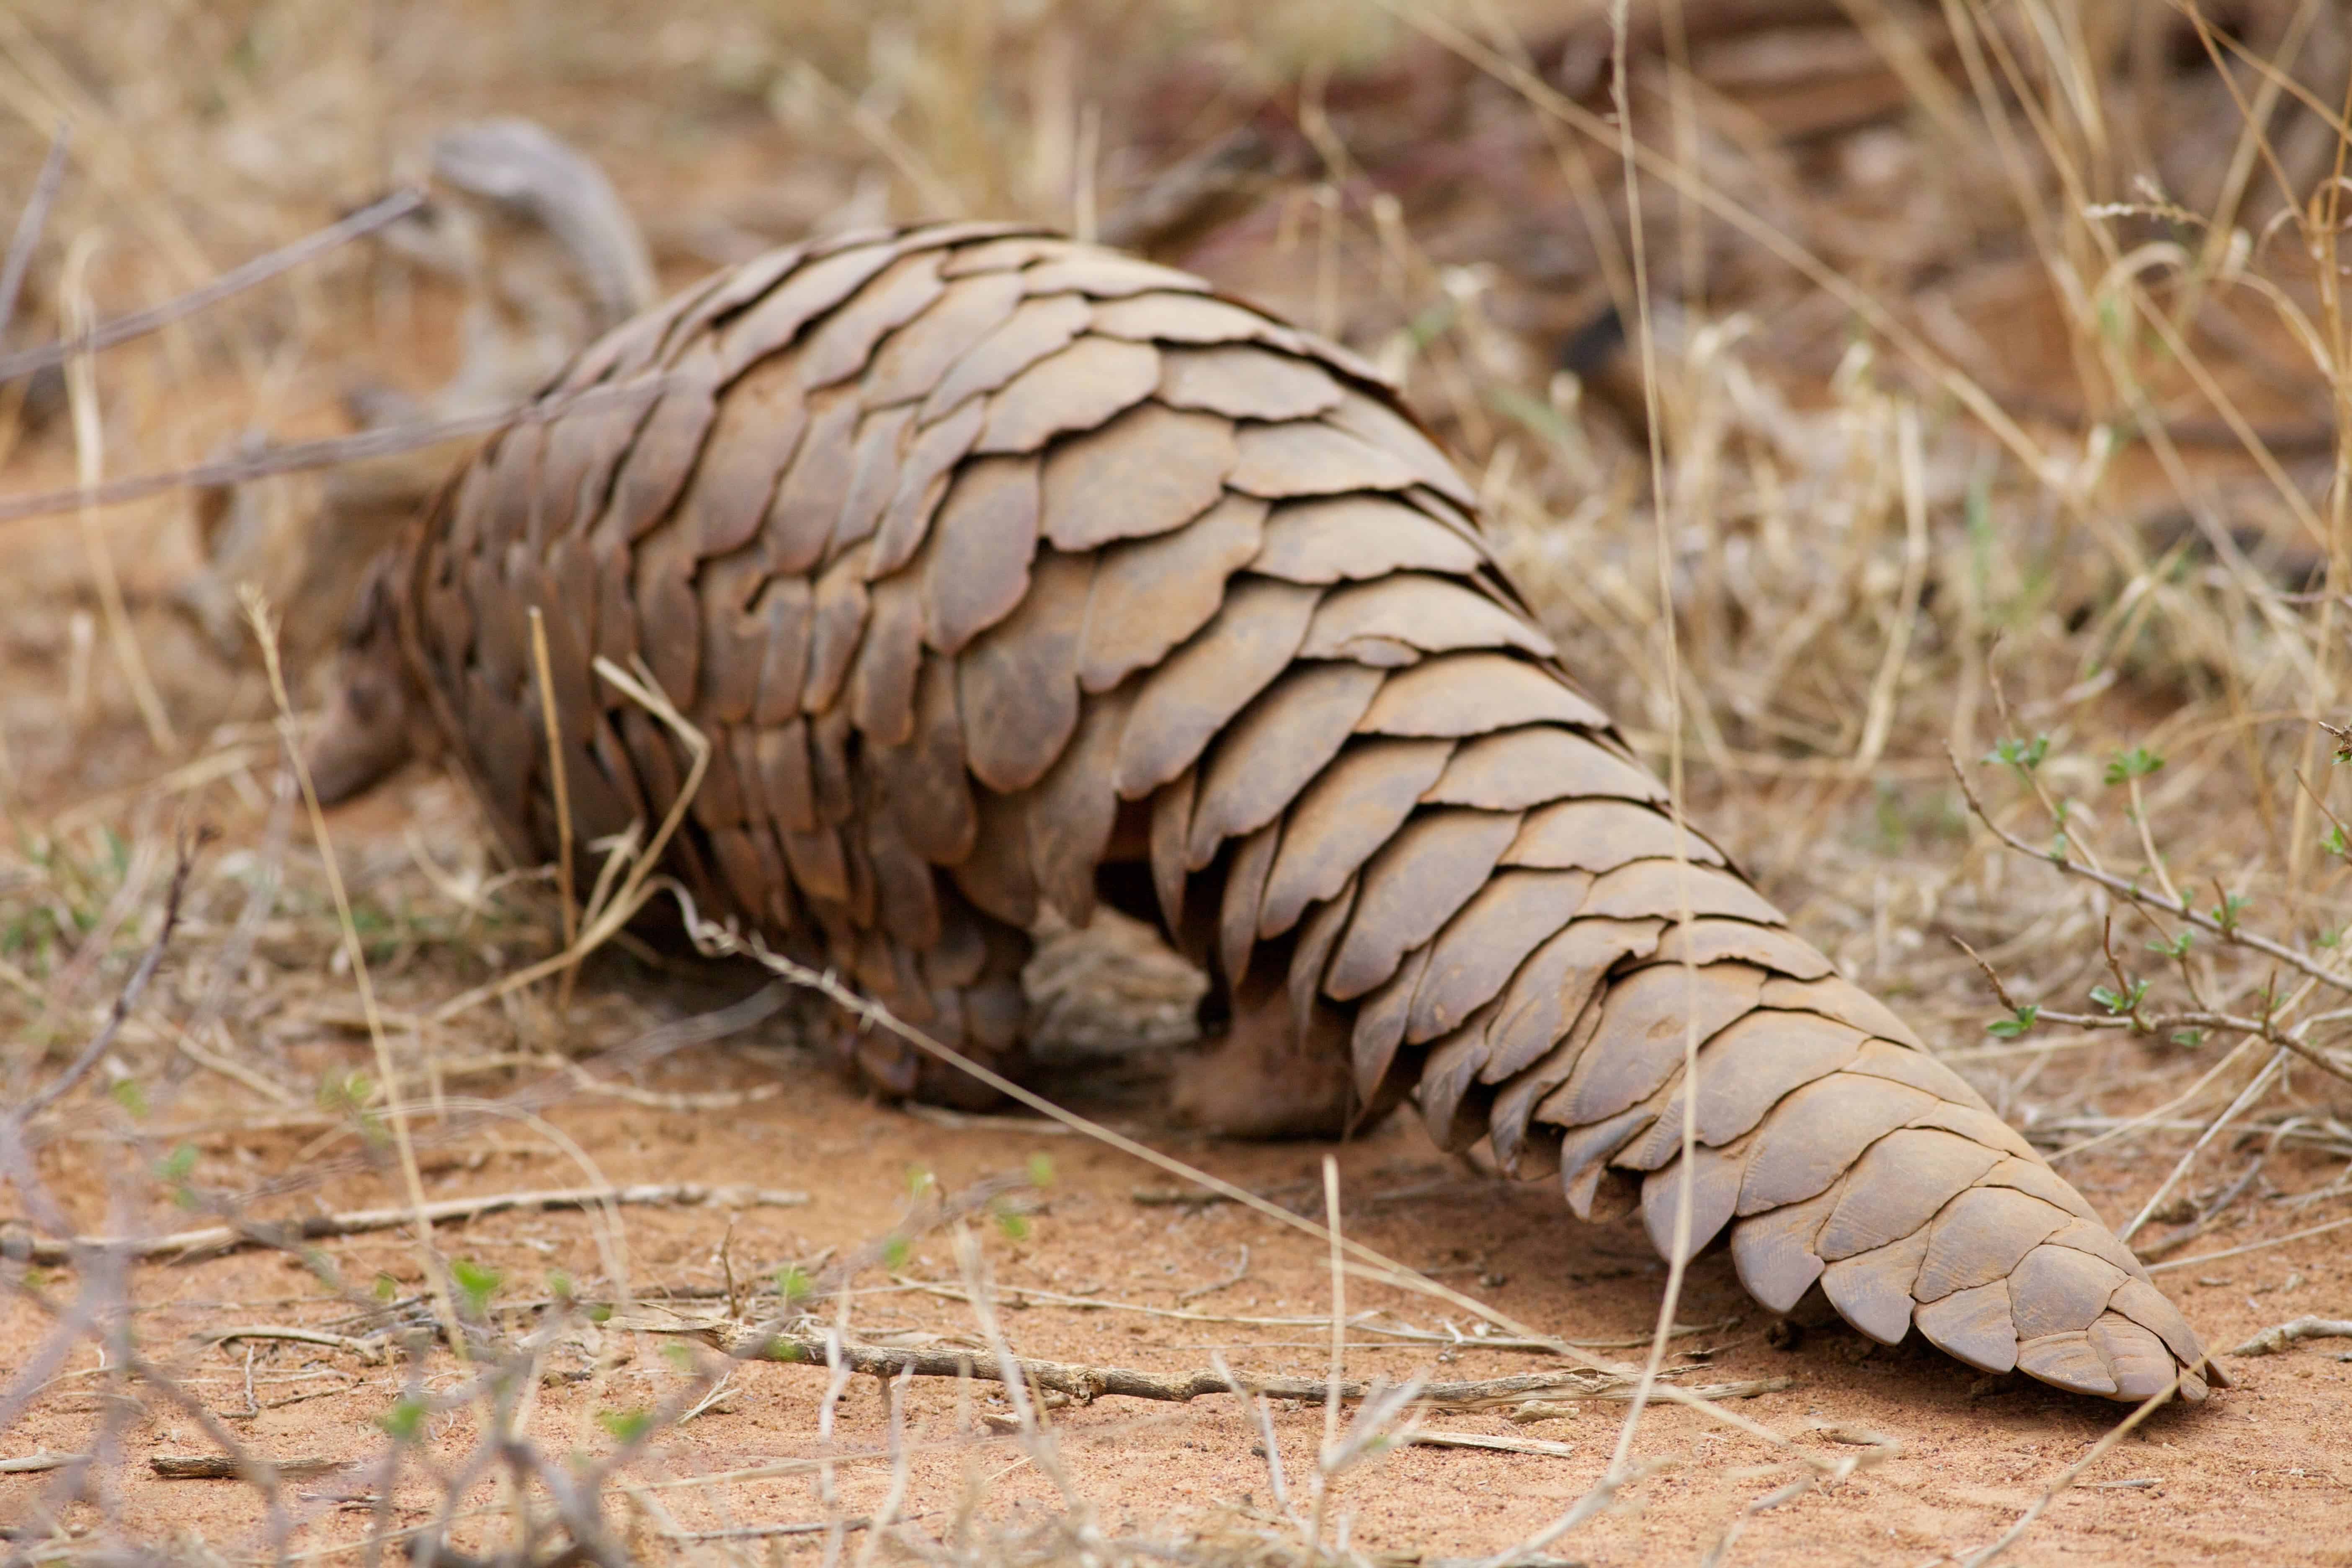 The pangolin is the only scaled mammal. It's also threatened by extinction, largely due to trafficking. Image credits: David Brossard.